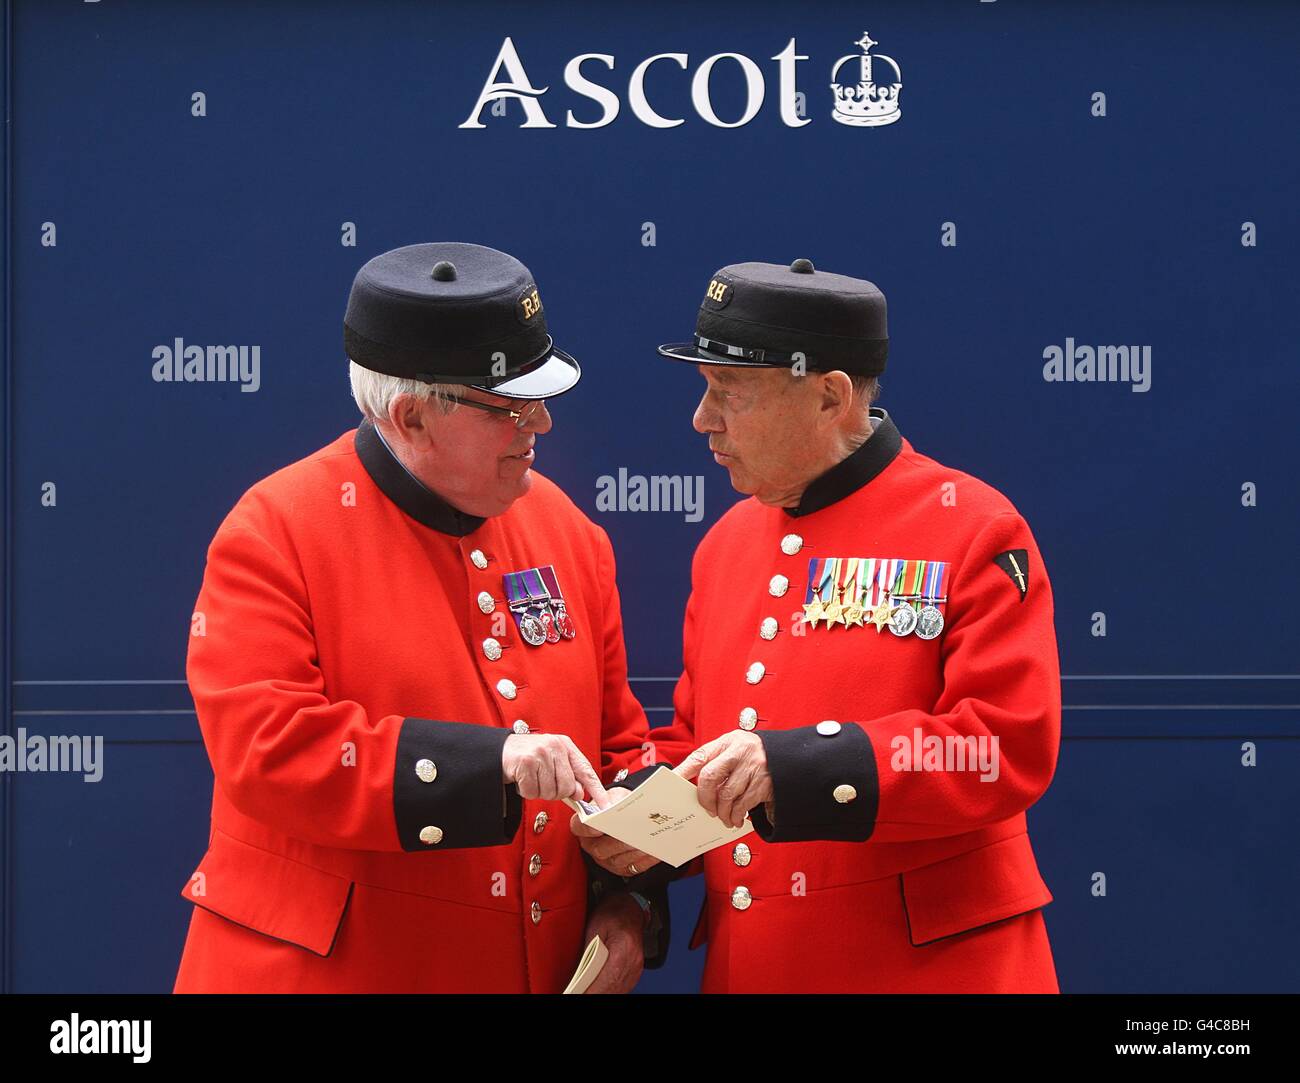 Horse Racing - The Royal Ascot Meeting 2011 - Day Two - Ascot Racecourse. Two Chelsea Pensioners discuss the form during Day Two of the 2011 Royal Ascot Meeting. Stock Photo